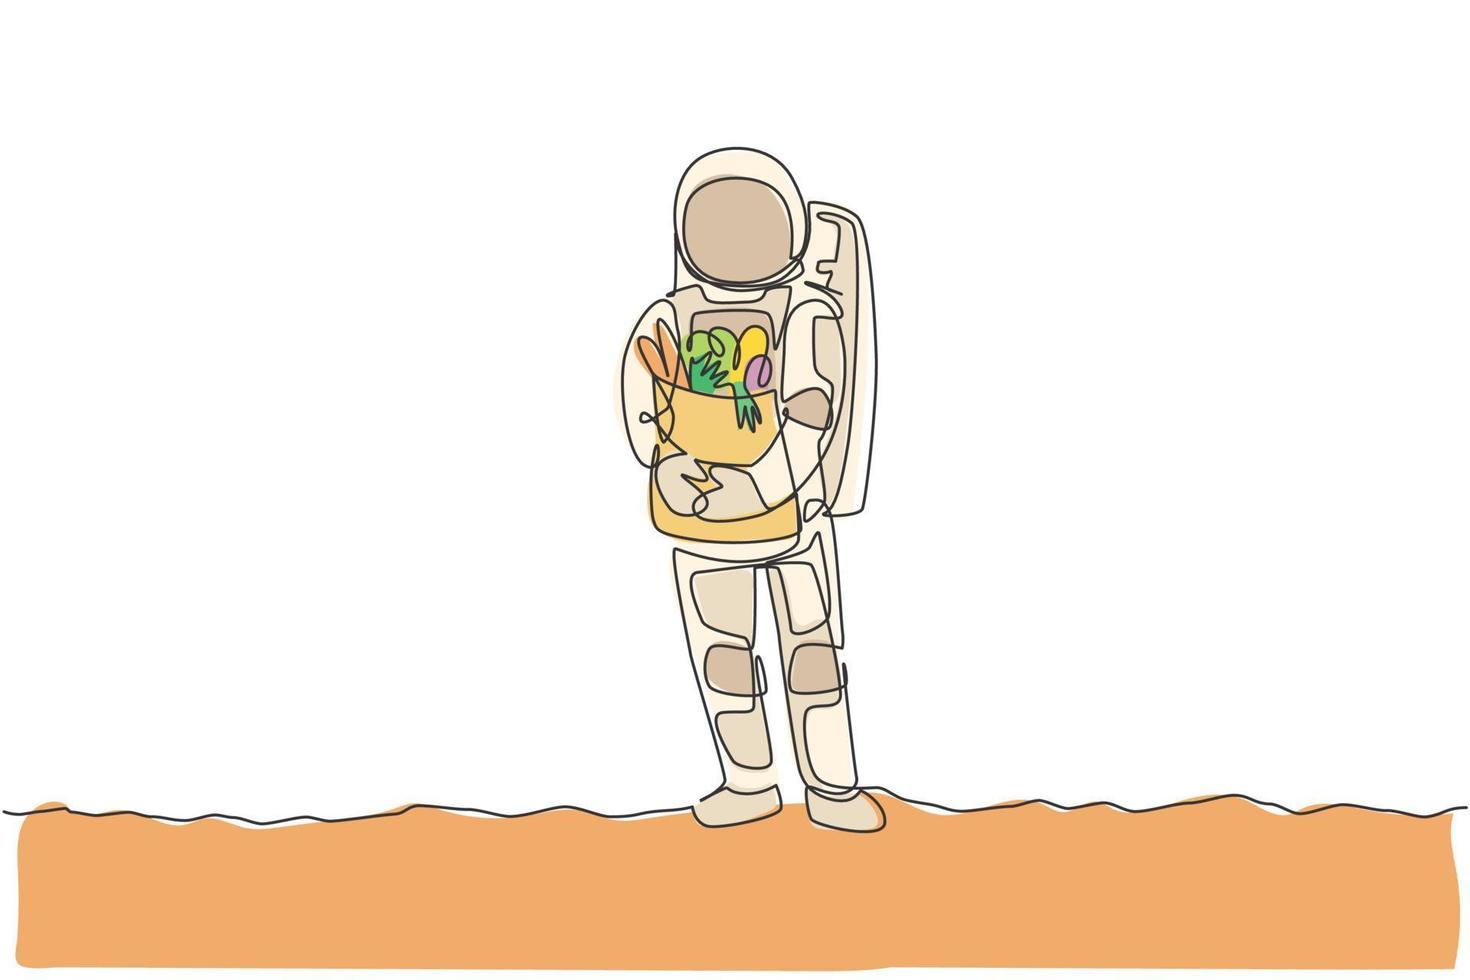 One single line drawing of astronaut bring paper bag full of groceries on chest in moon surface in moon surface vector illustration. Outer space farming concept. Modern continuous line draw design